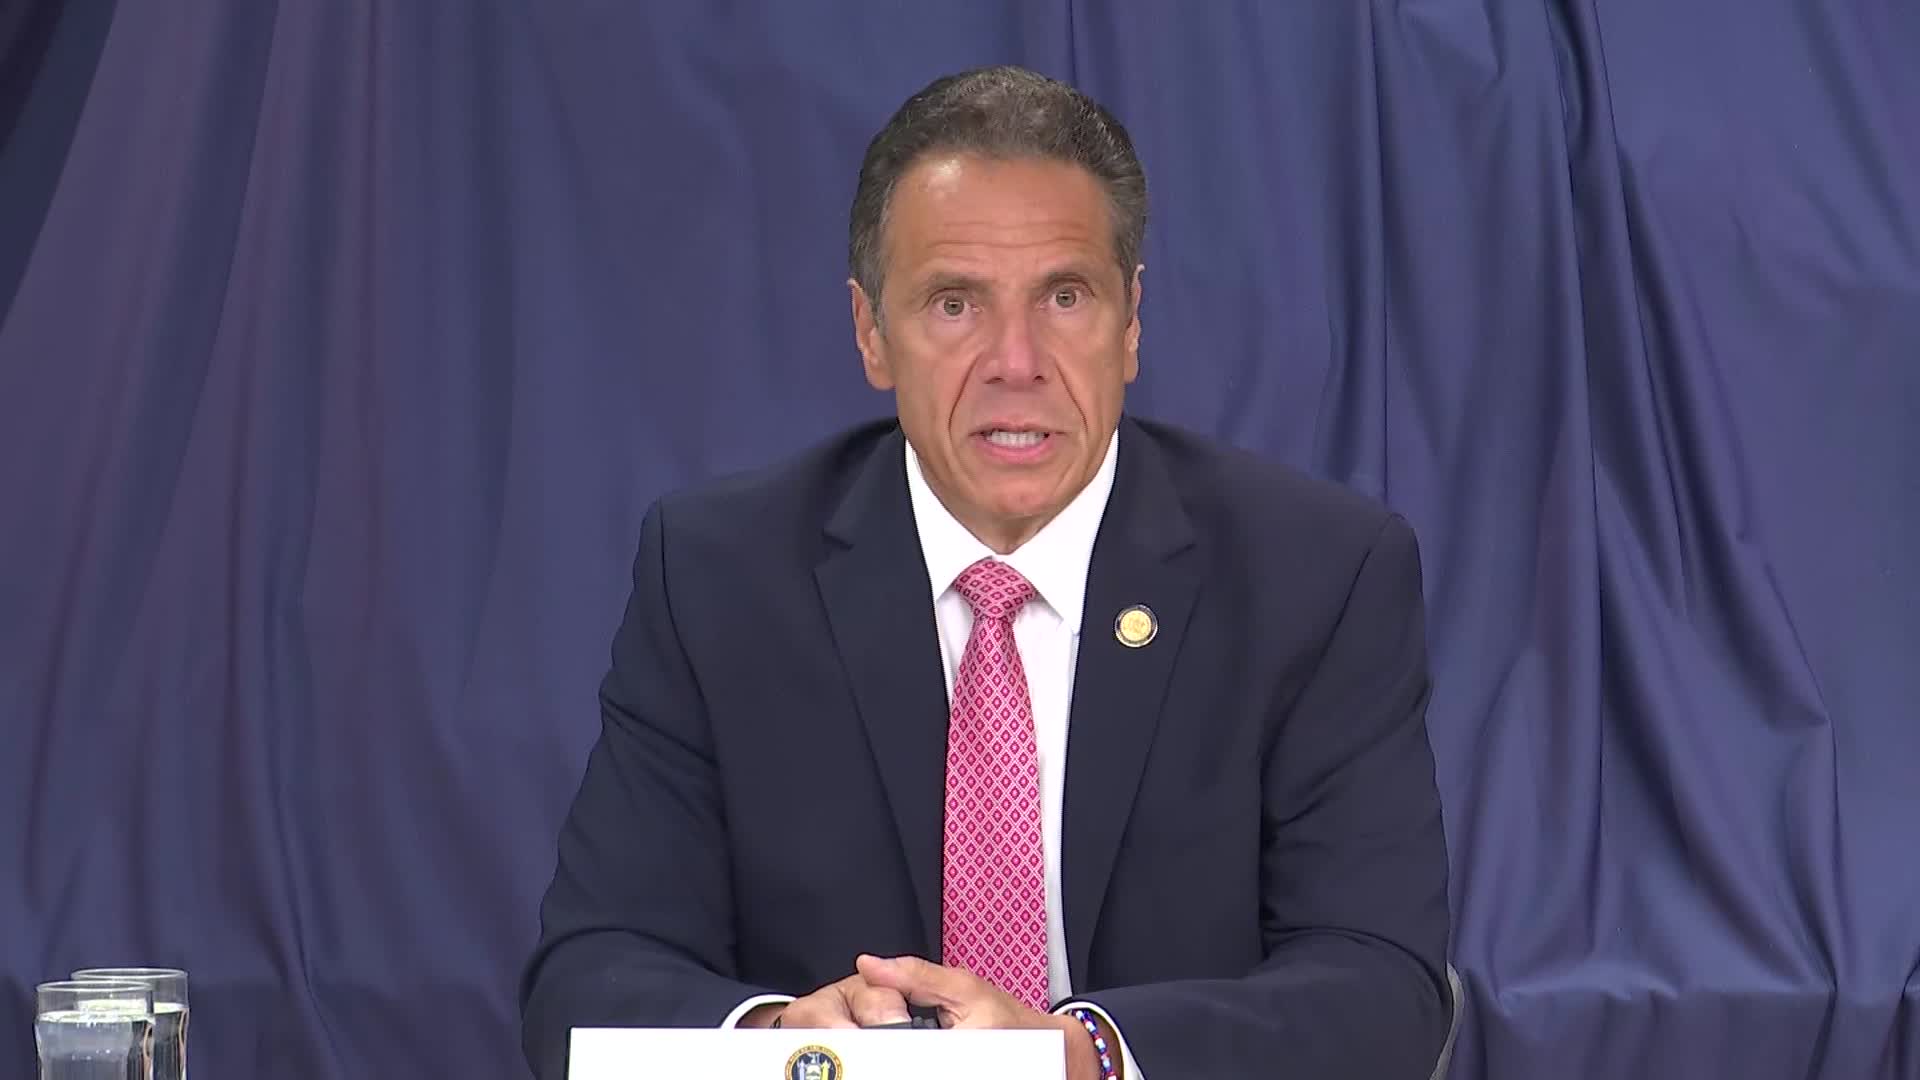 New York Gov. Andrew Cuomo speaks during a press conference in New York on June 29.